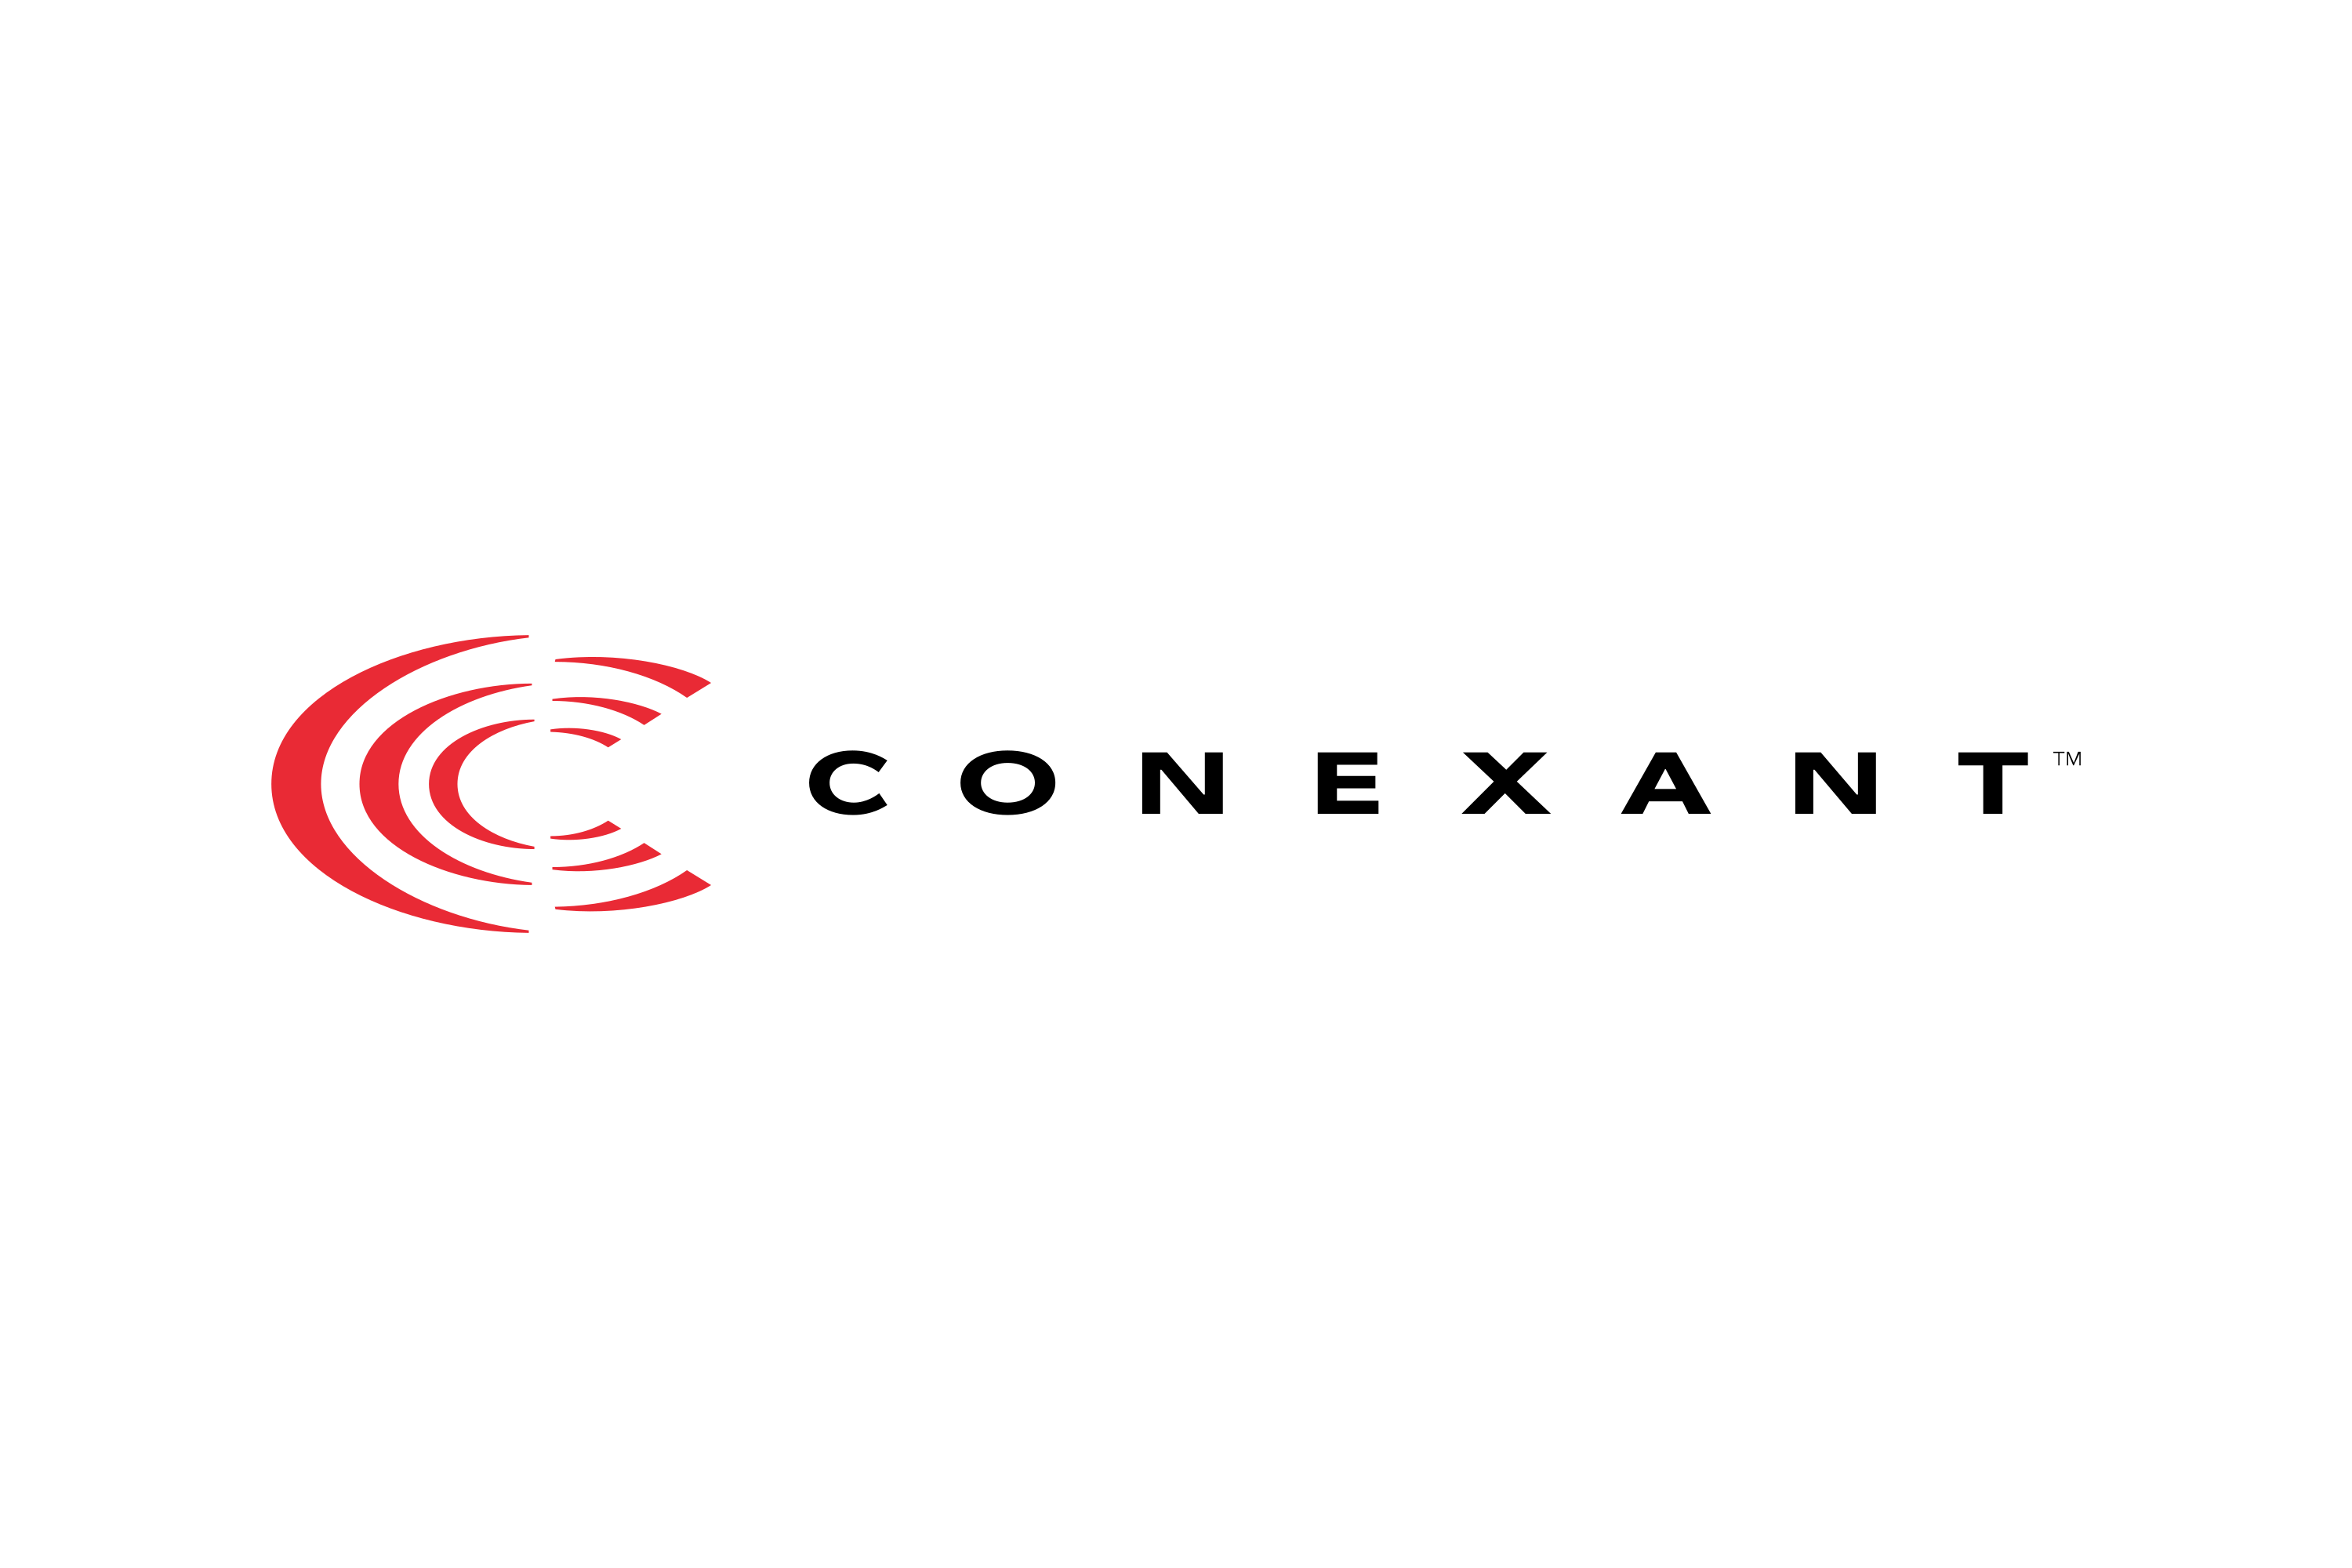 Download Conexant Logo in SVG Vector or PNG File Format - Logo.wine